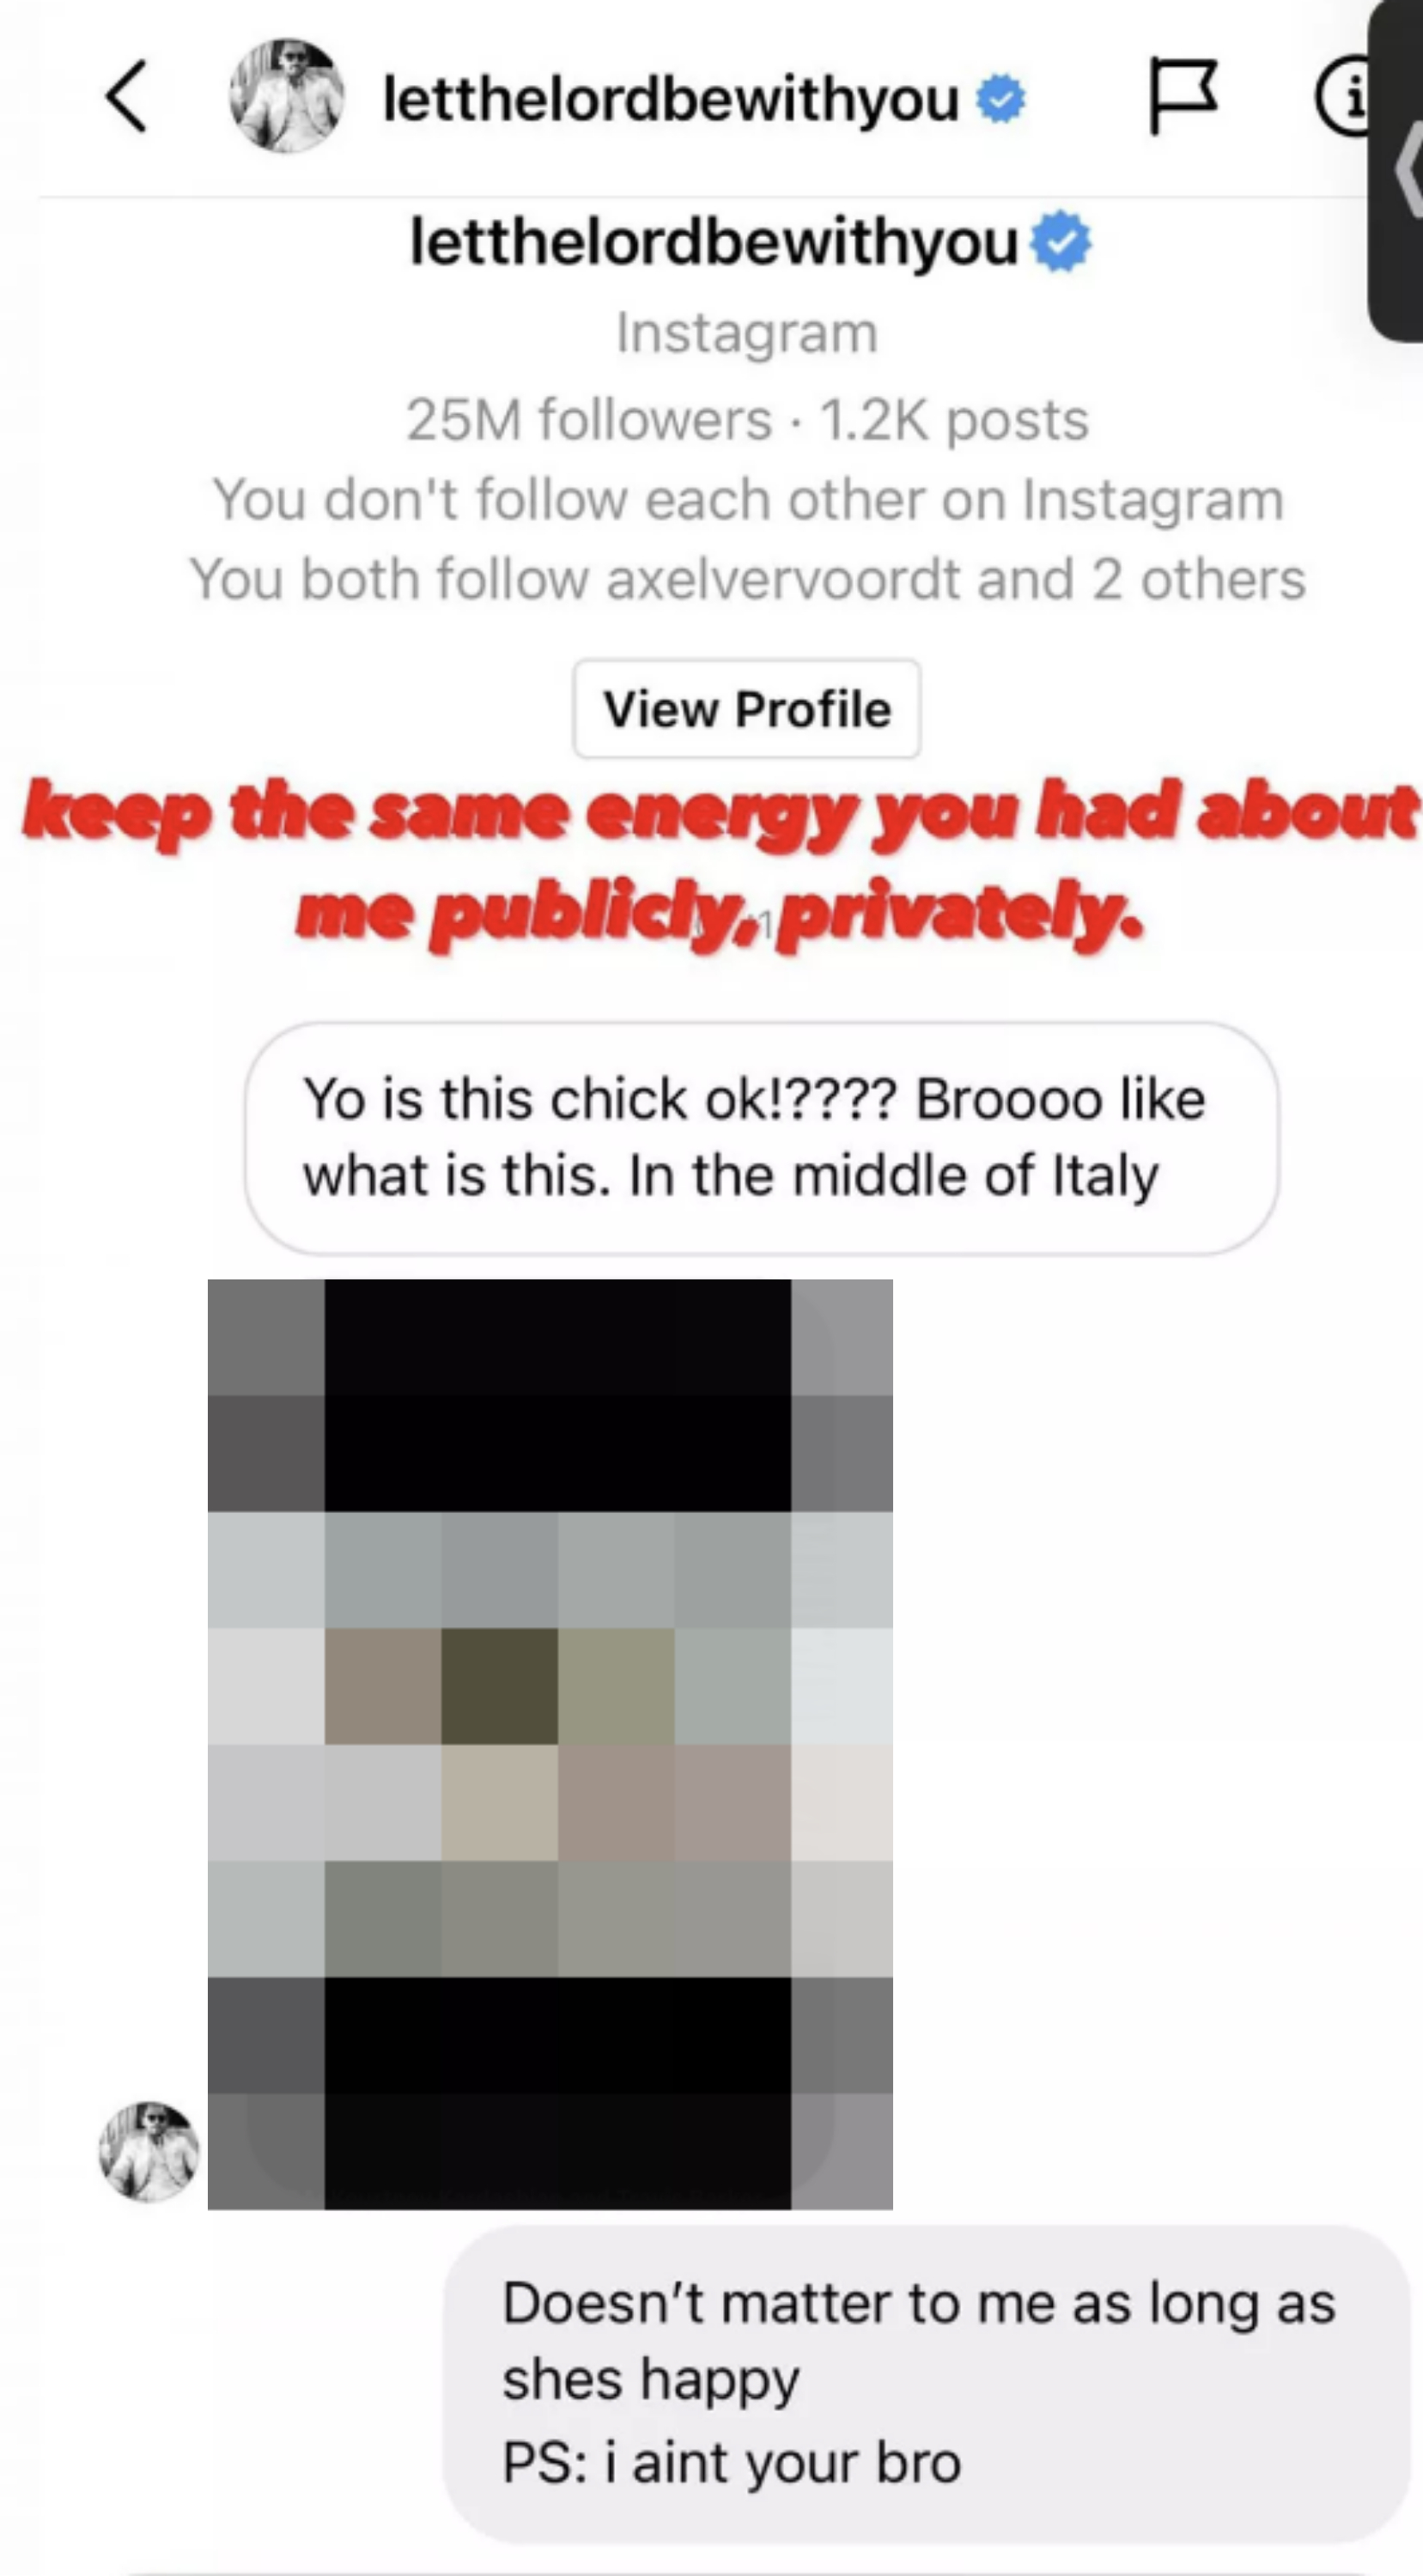 Scott allegedly saying &quot;Yo is this chick ok!?&quot; and &quot;Broooo like what is this in the middle of Italy,&quot; with the image blurred out and this response, &quot;Doesn&#x27;t matter to me as long as she&#x27;s happy; PS: i aint your bro&quot;